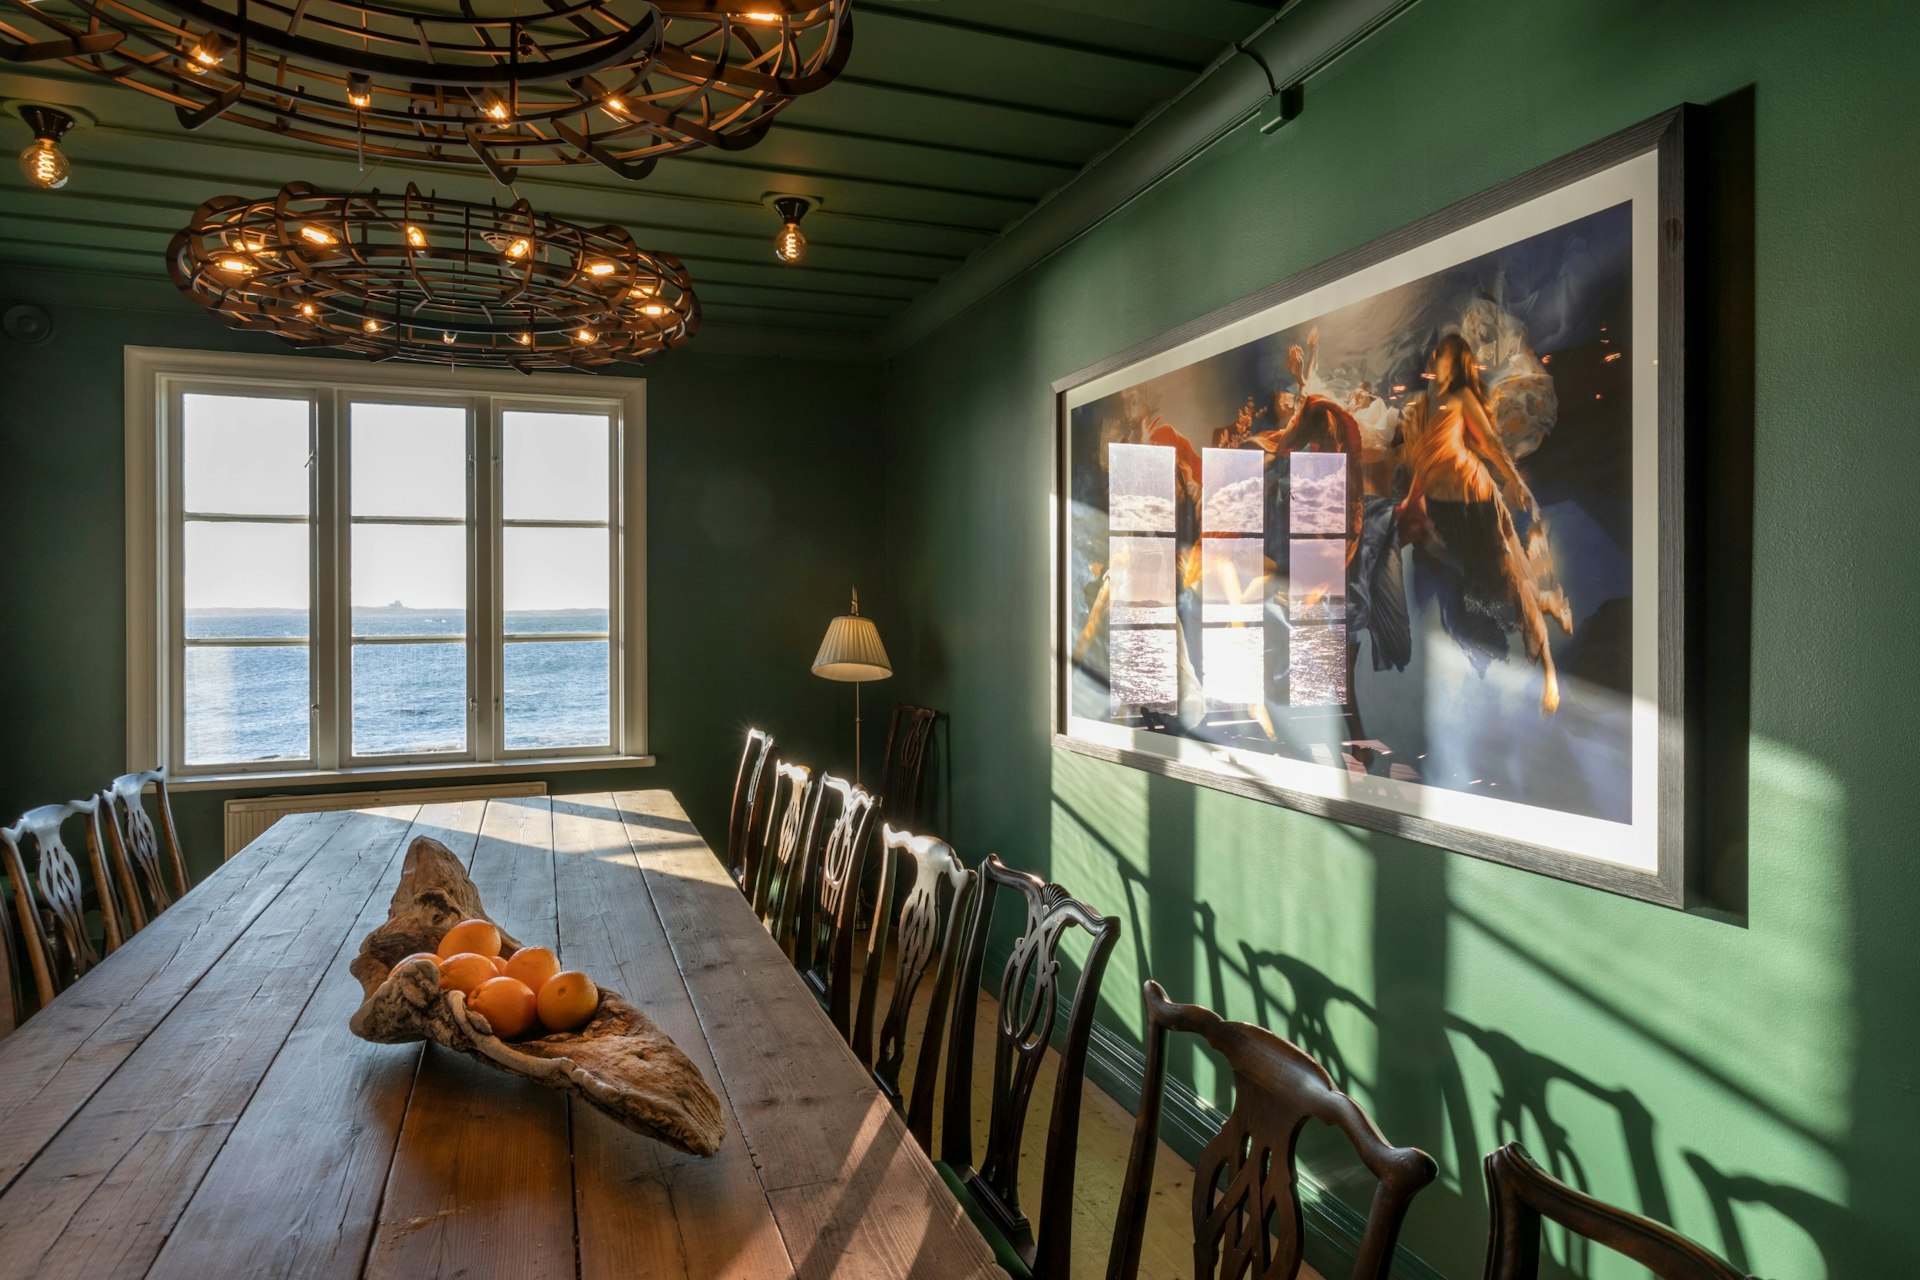 The dining room at the Pater Noster hotel in Sweden